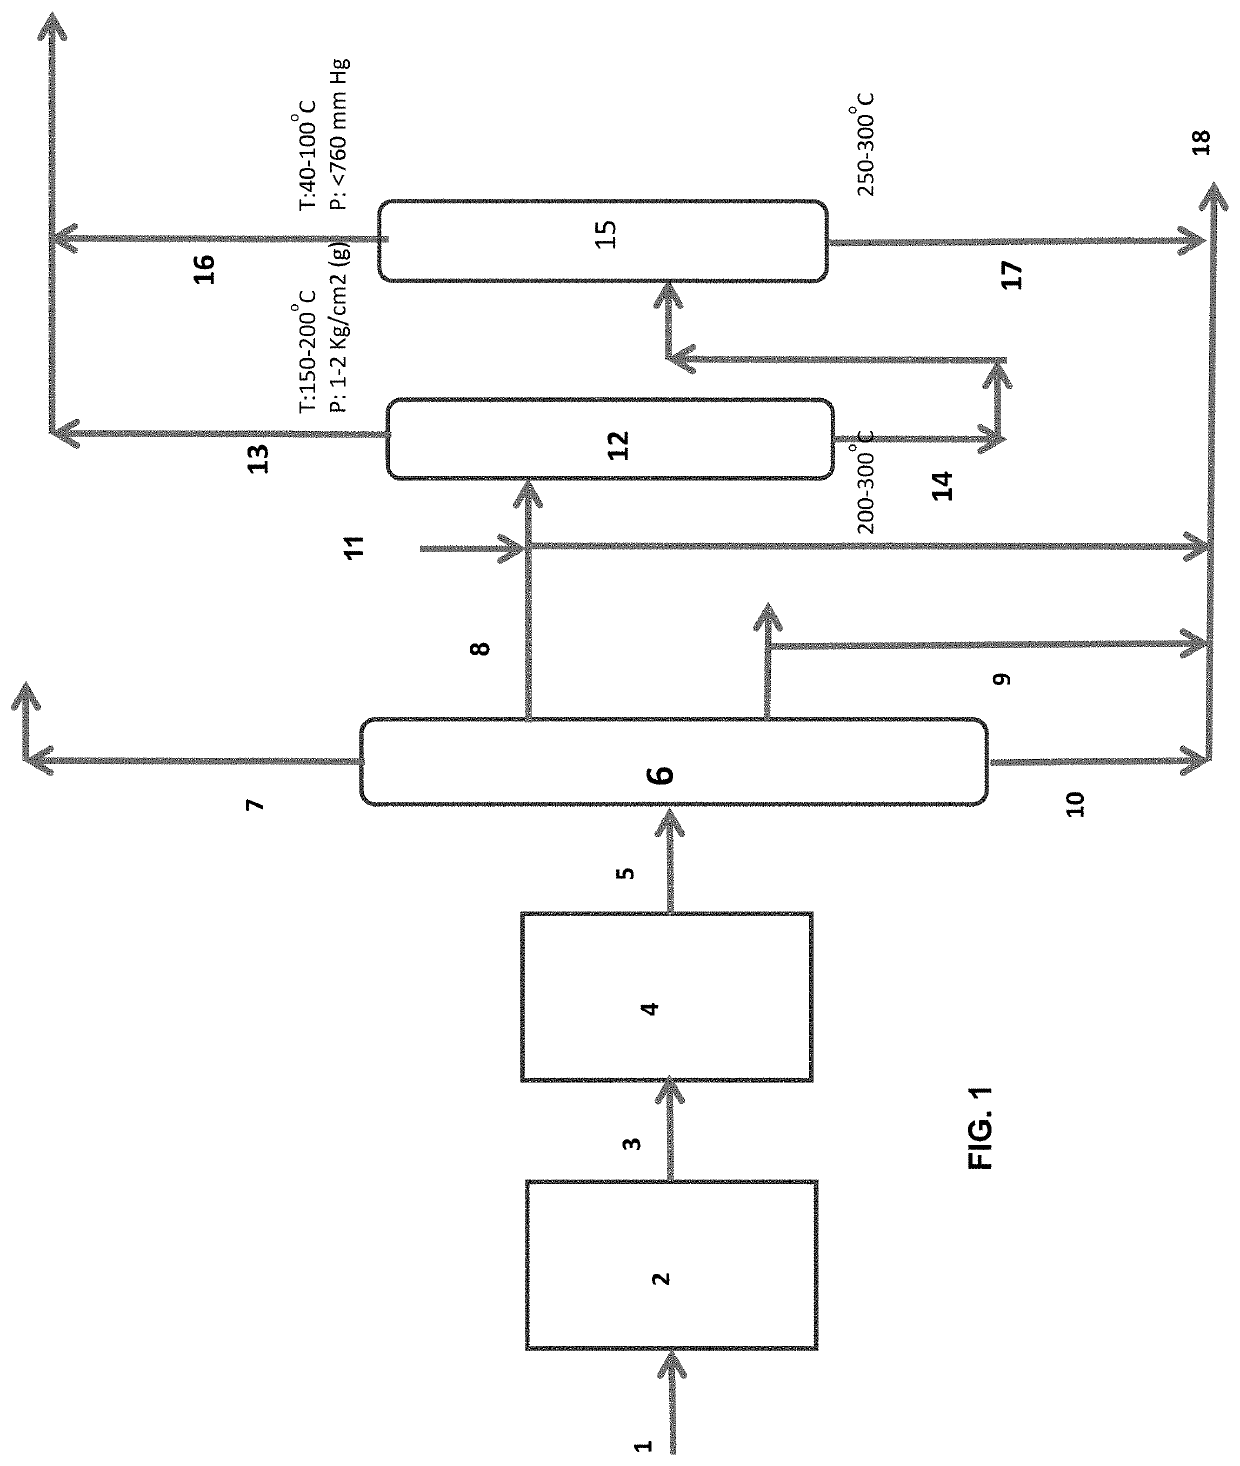 Process for production of MARPOL compliant bunker fuel from petroleum residues